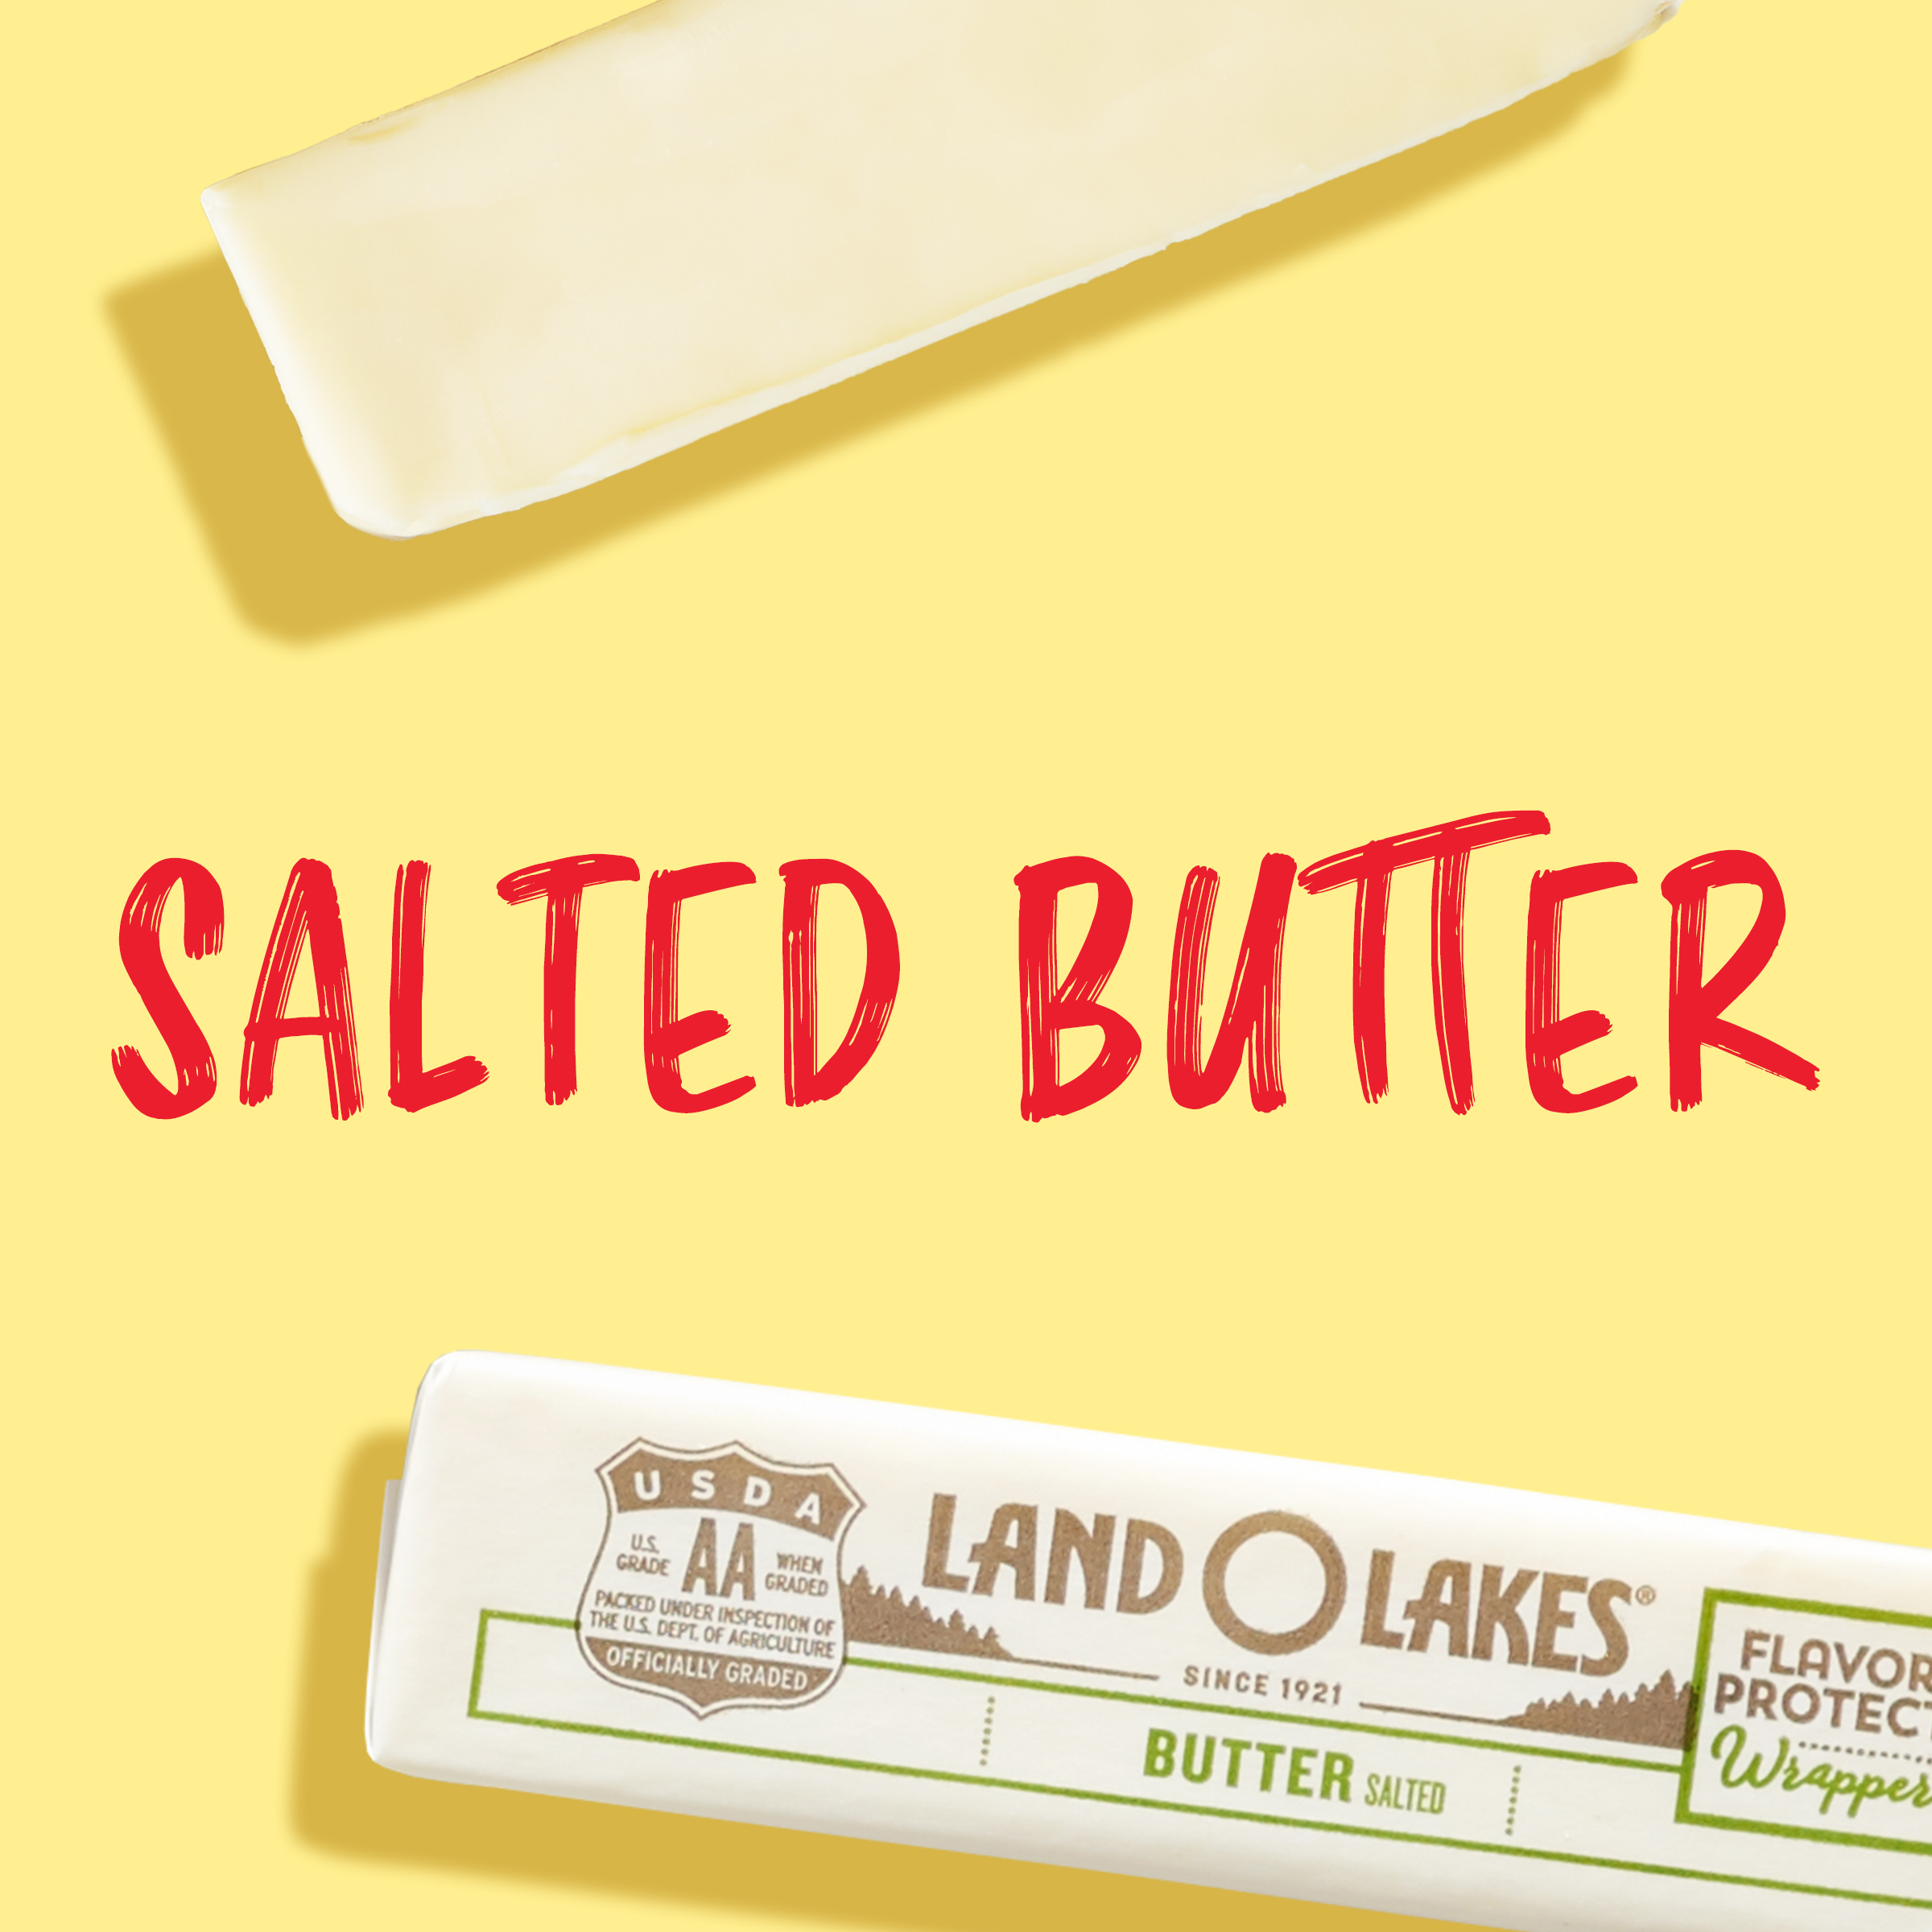 Land O Lakes Salted Stick Butter, 16 oz, 4 Sticks - image 2 of 9